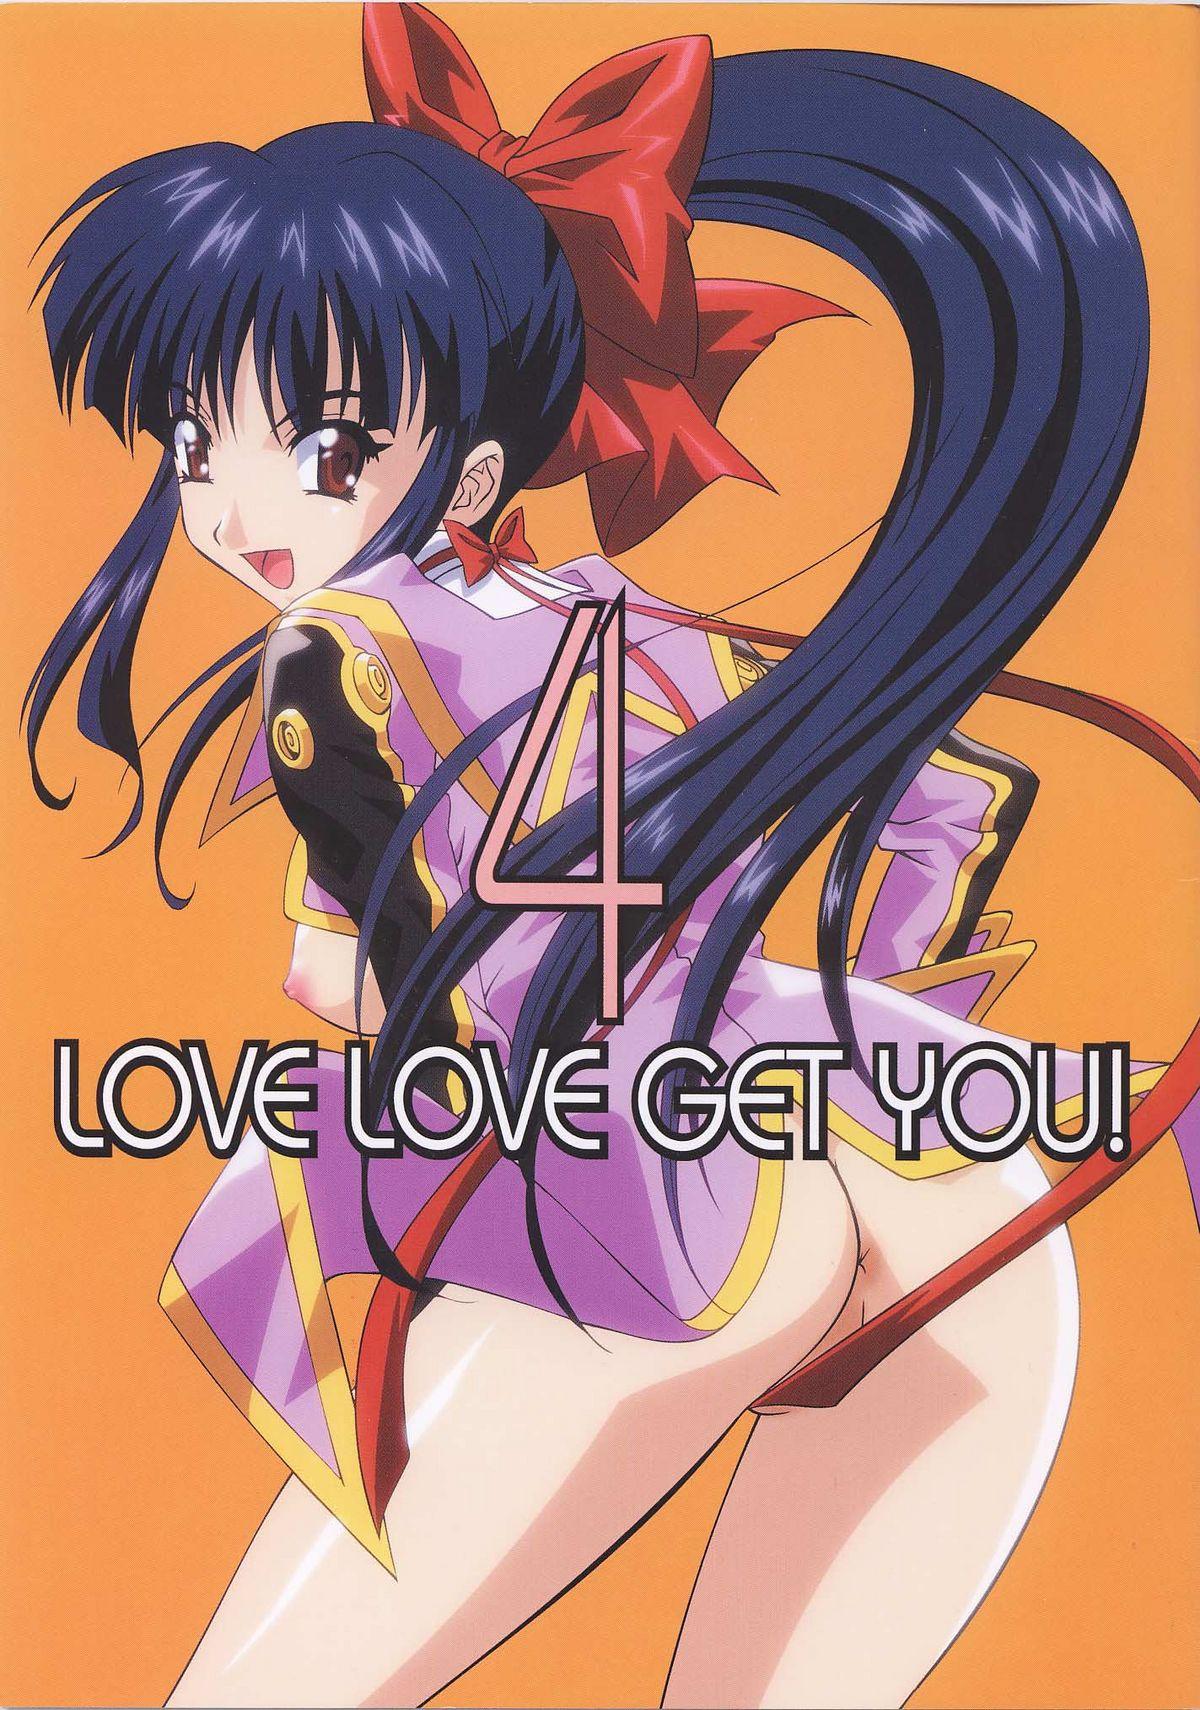 Young Tits LOVE LOVE GET YOU! 4 - Sakura taisen Argentina - Picture 1